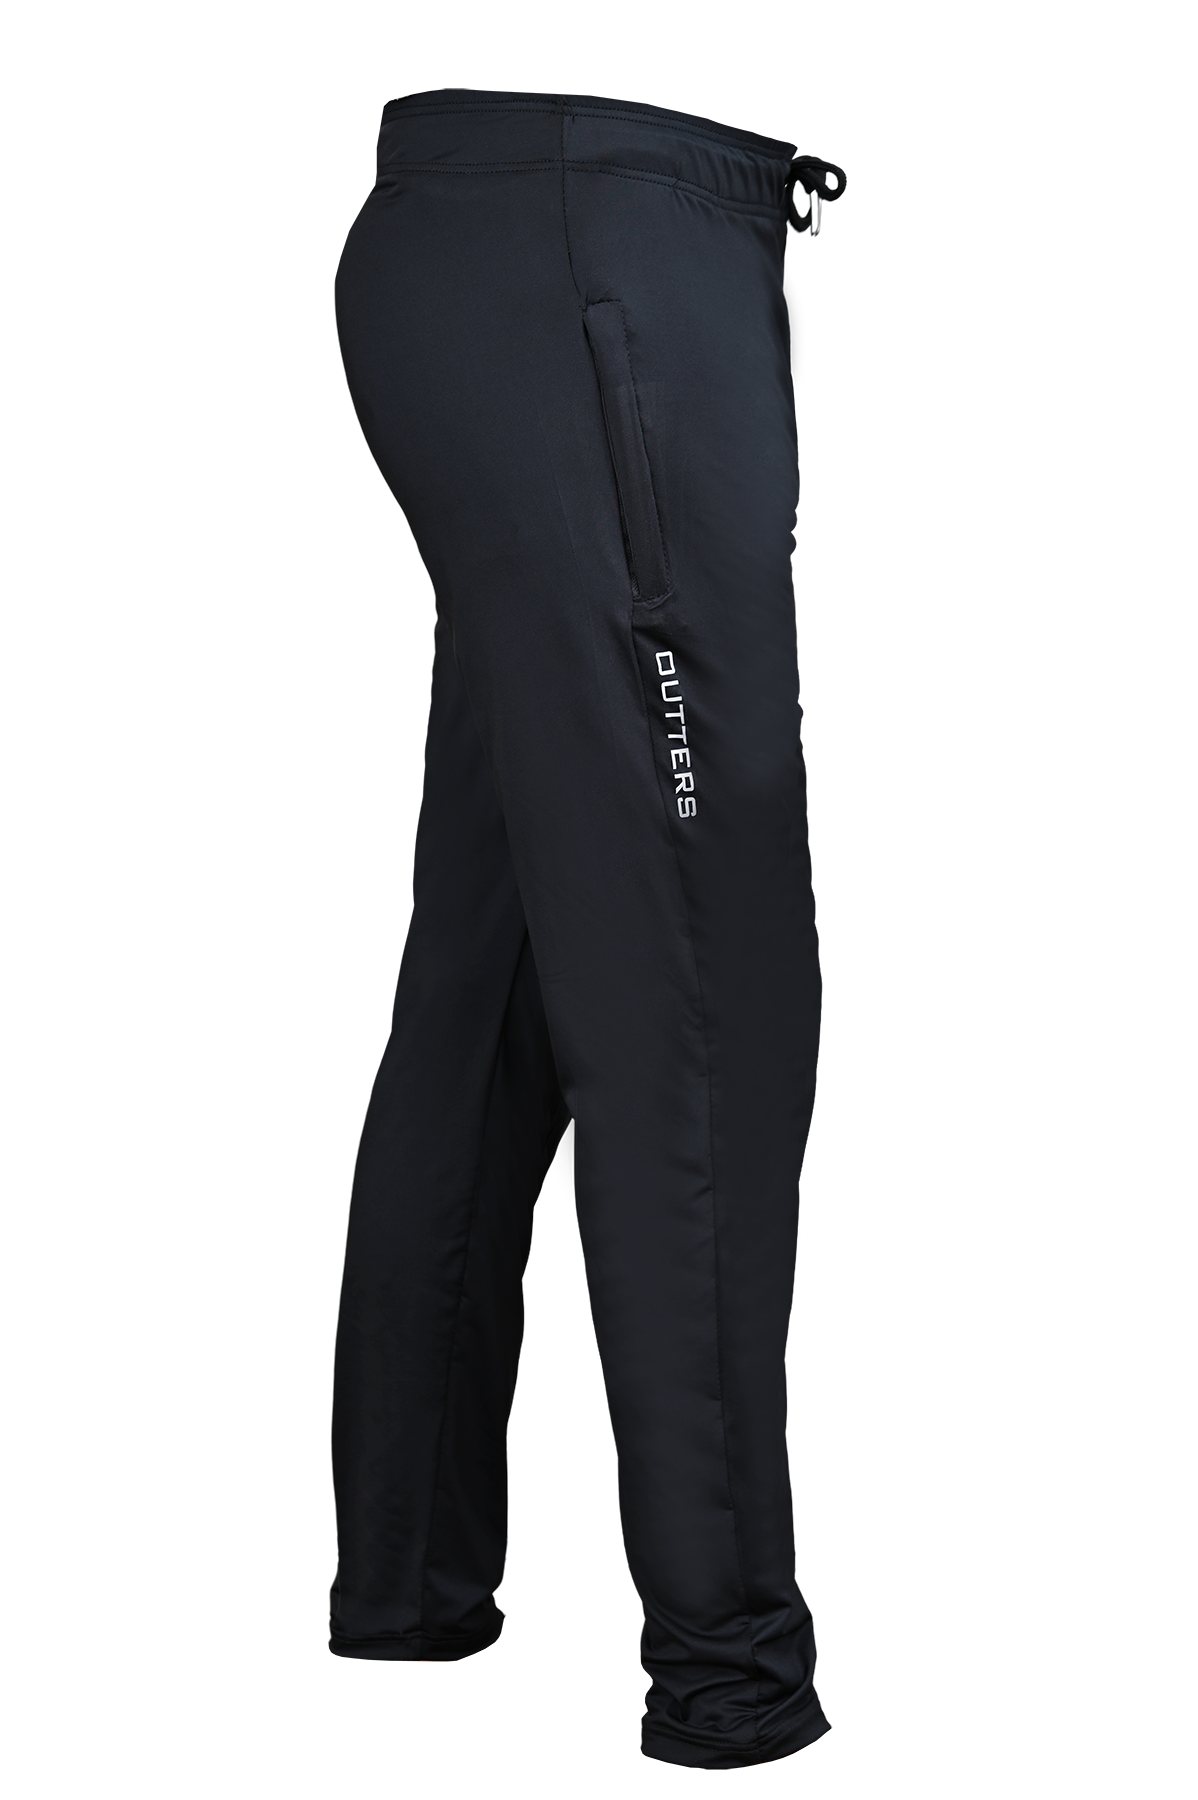 Outters Men Performance Running Sports trouser Gym Fitness Black